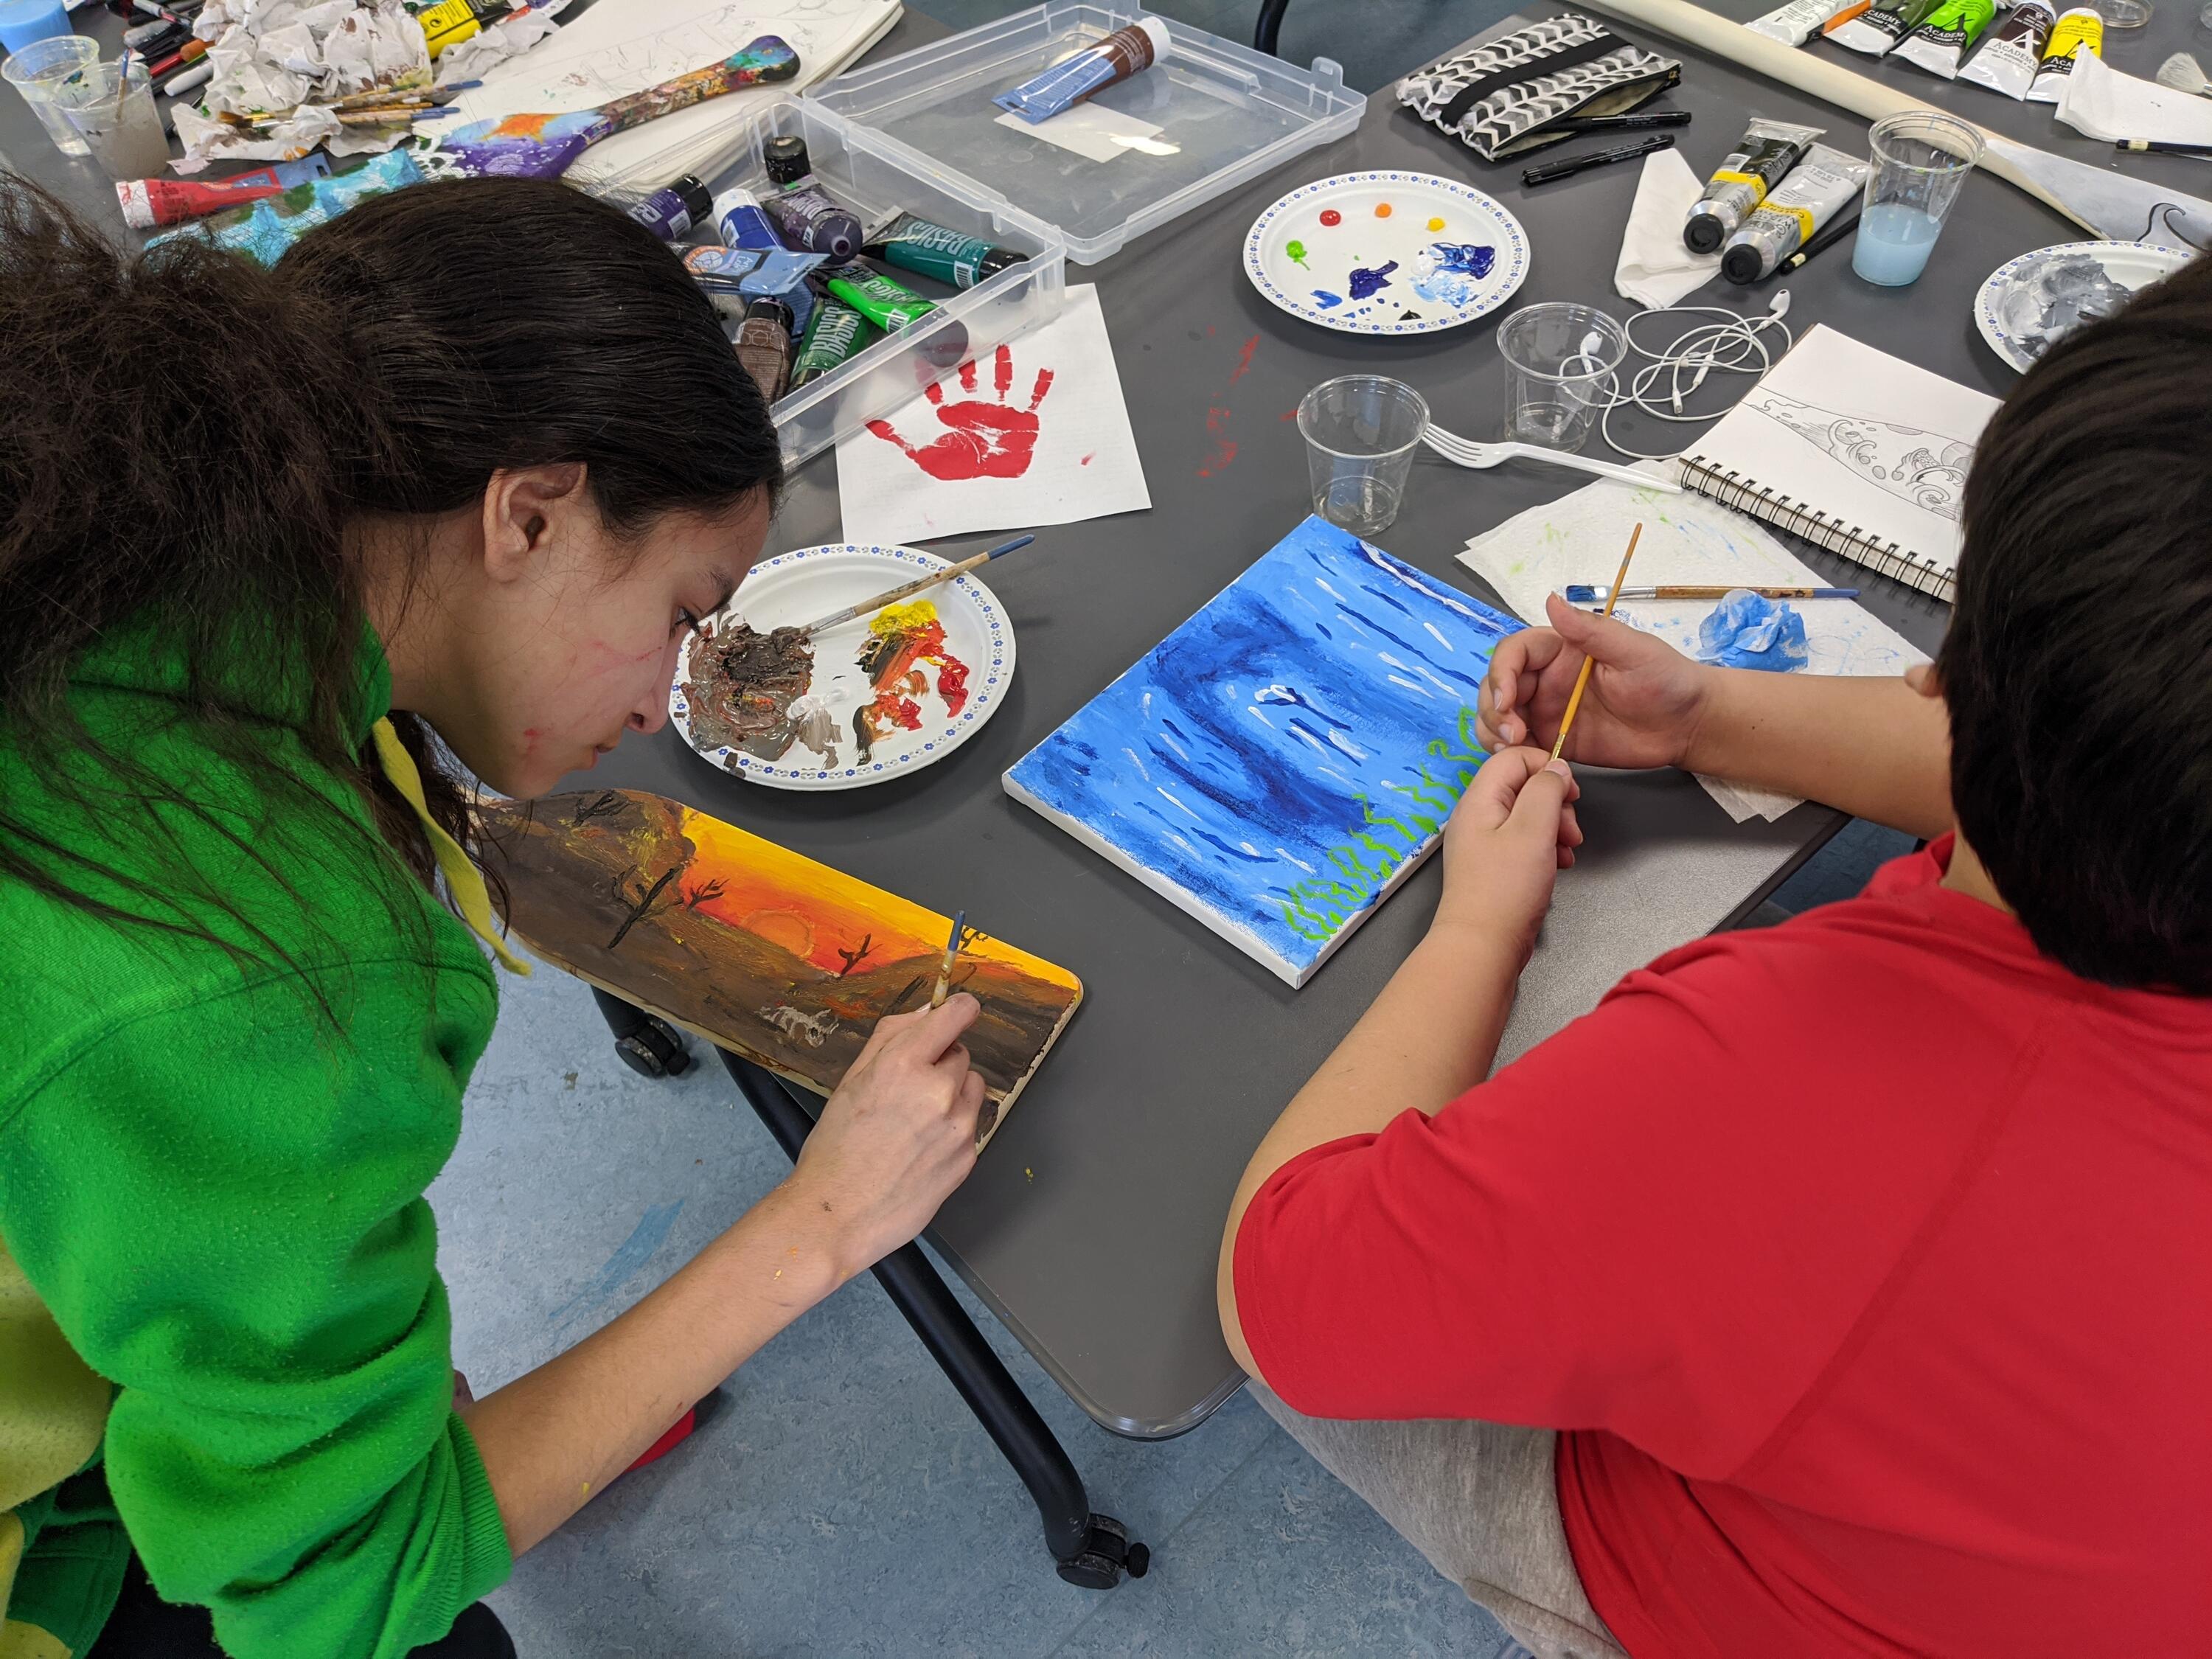 Indigenous youth creating pieces during the art camp on February 15, 2020